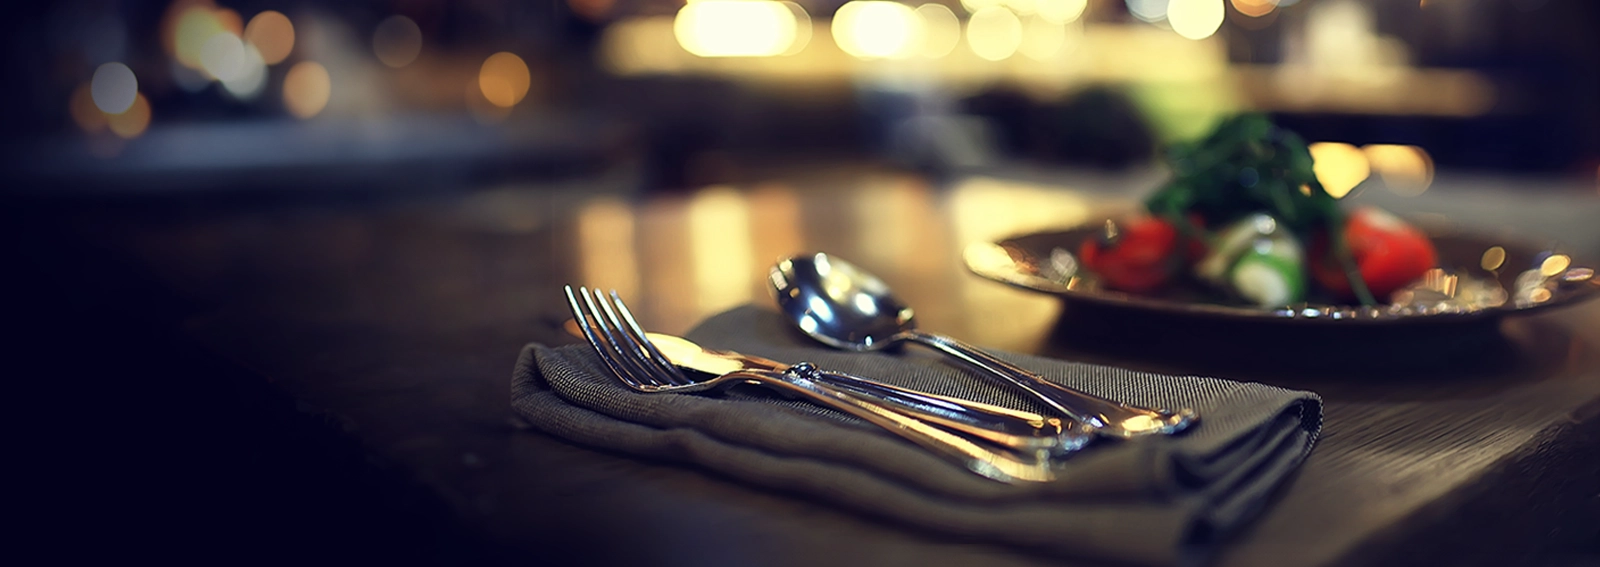 Image of cutlery laid out on table